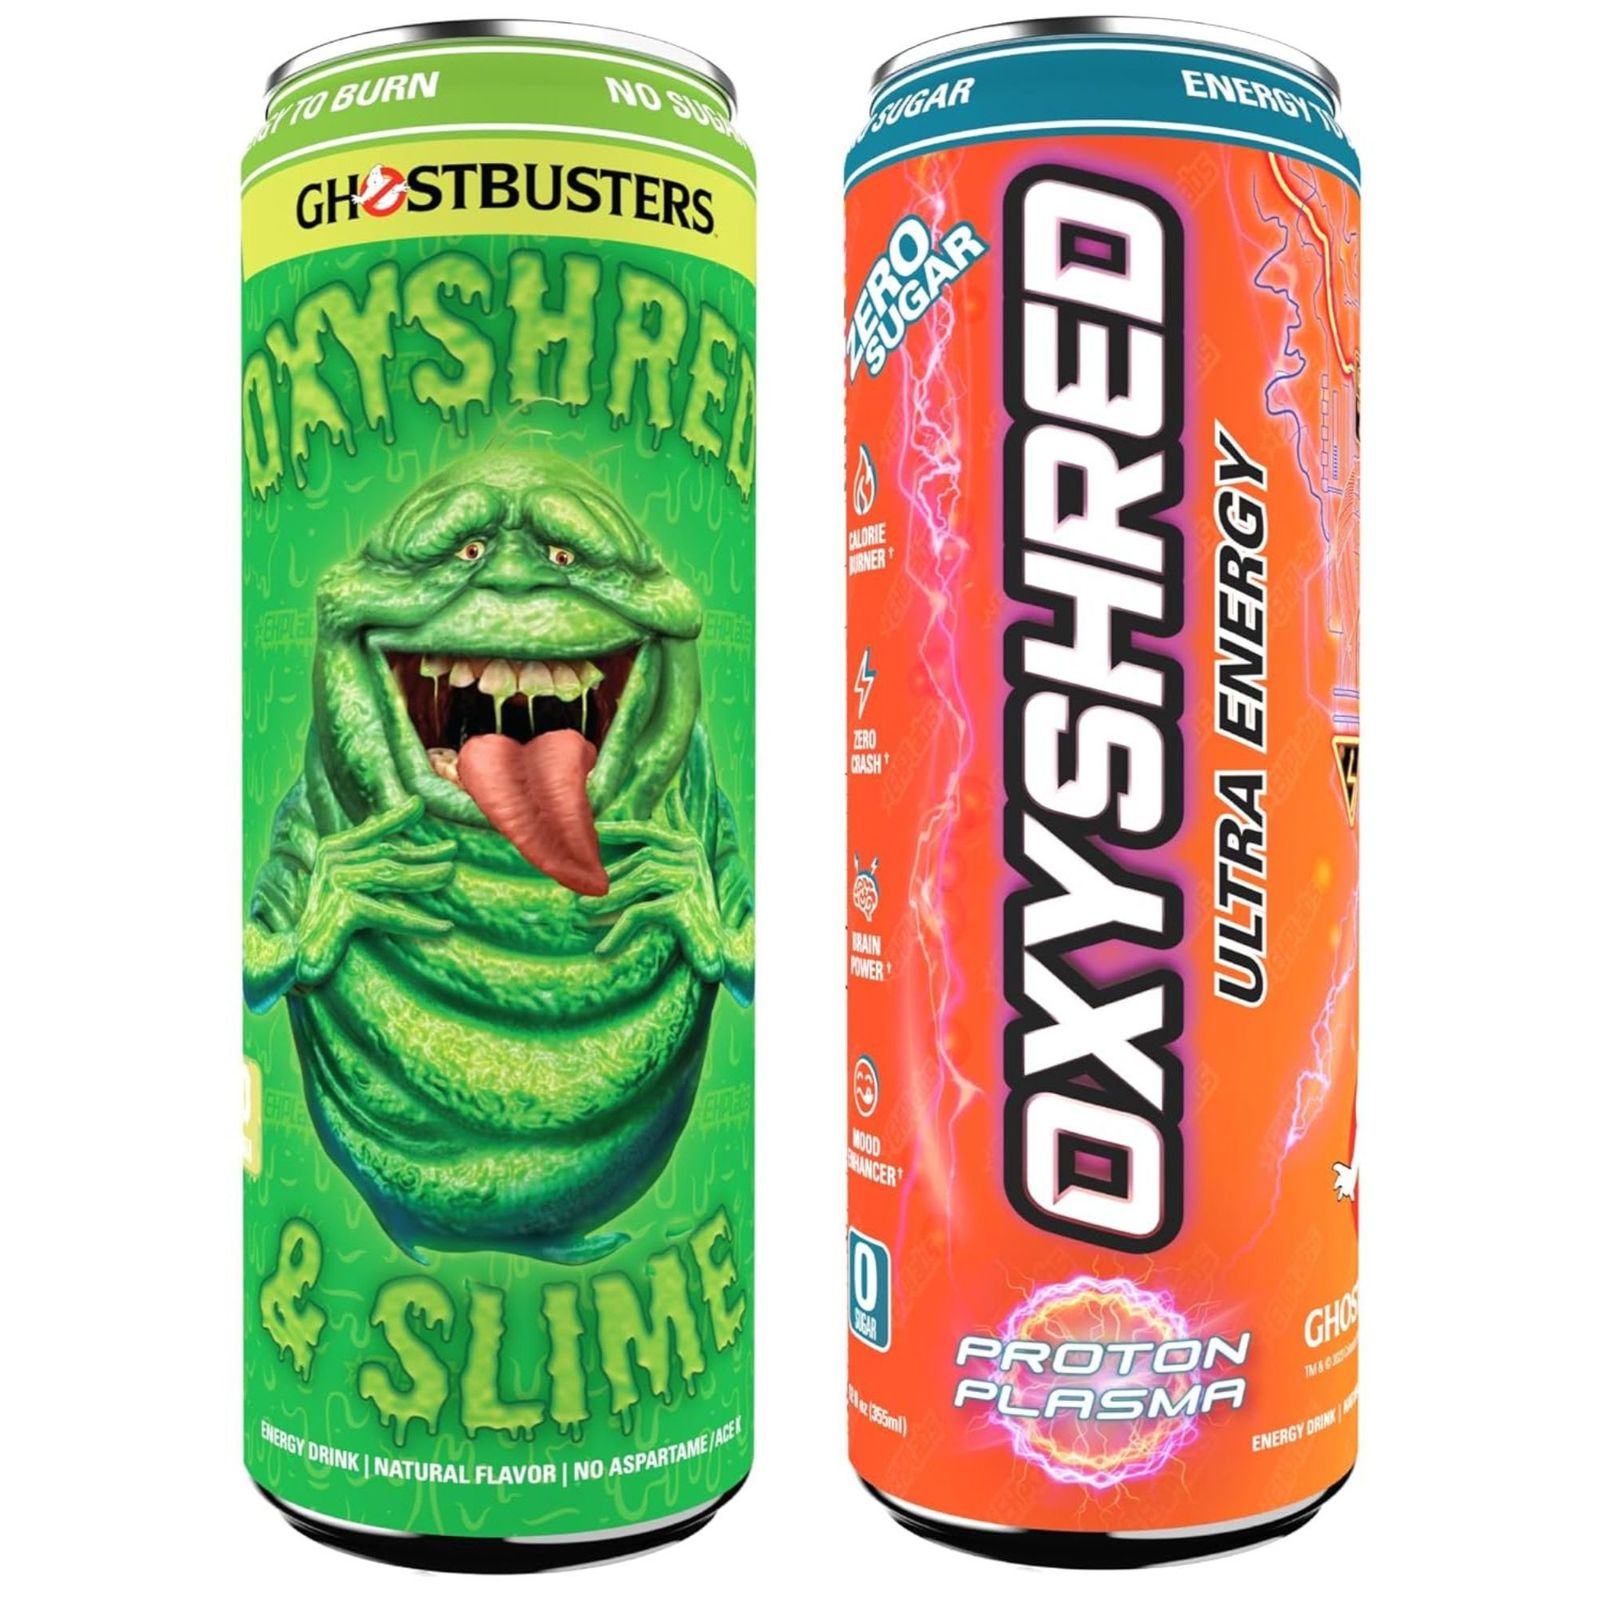 Limited Edition EHP Labs OxyShred Energy Drink 2 Flavor Ghostbusters 12 Pack  - $36.99